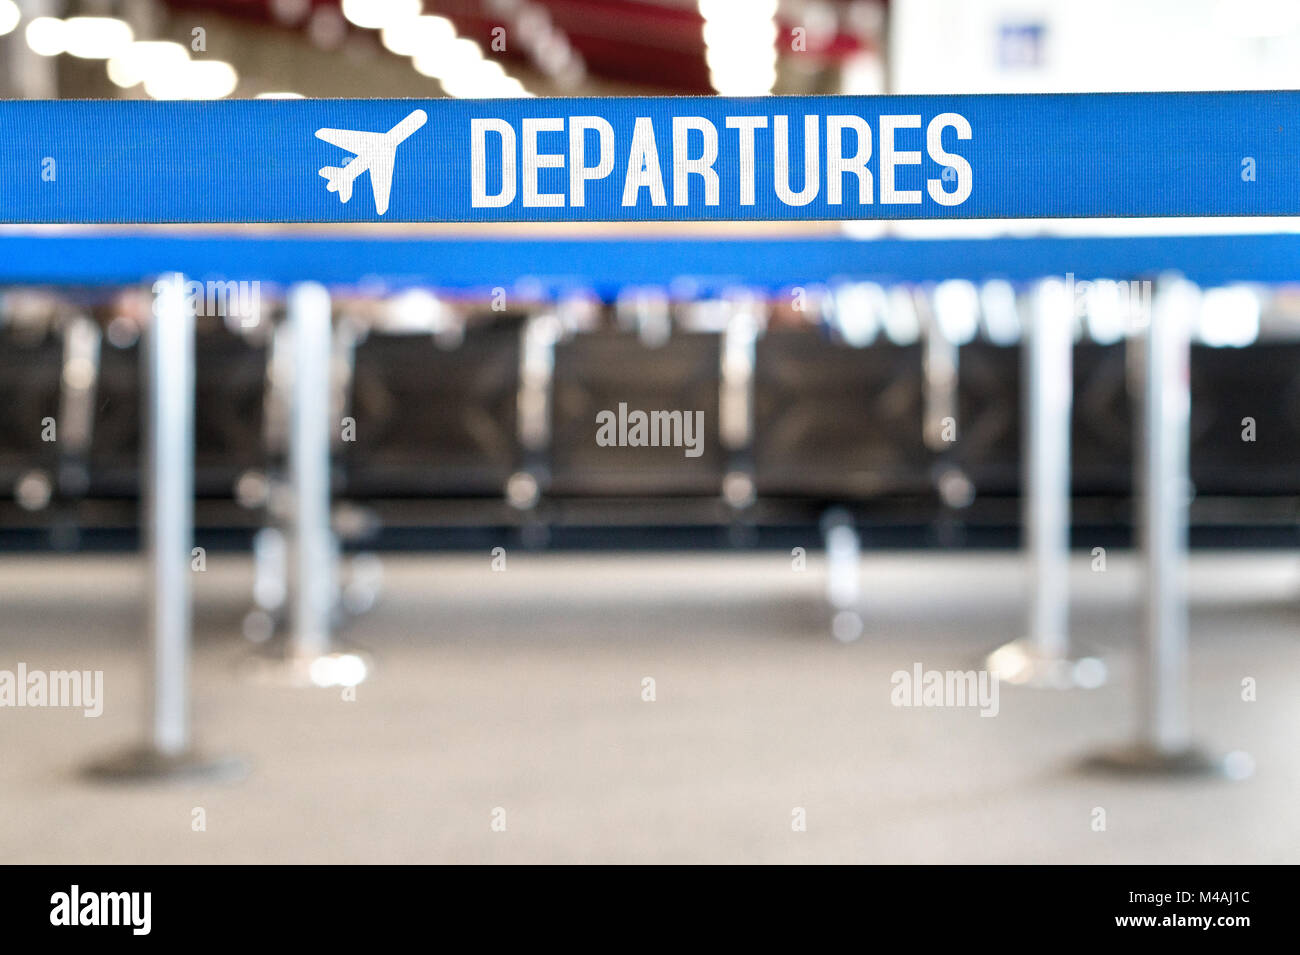 Departures text with airplane icon on a queue barrier. Waiting area and lounge seats at airport terminal. Travel, vacation and tourism concept. Stock Photo